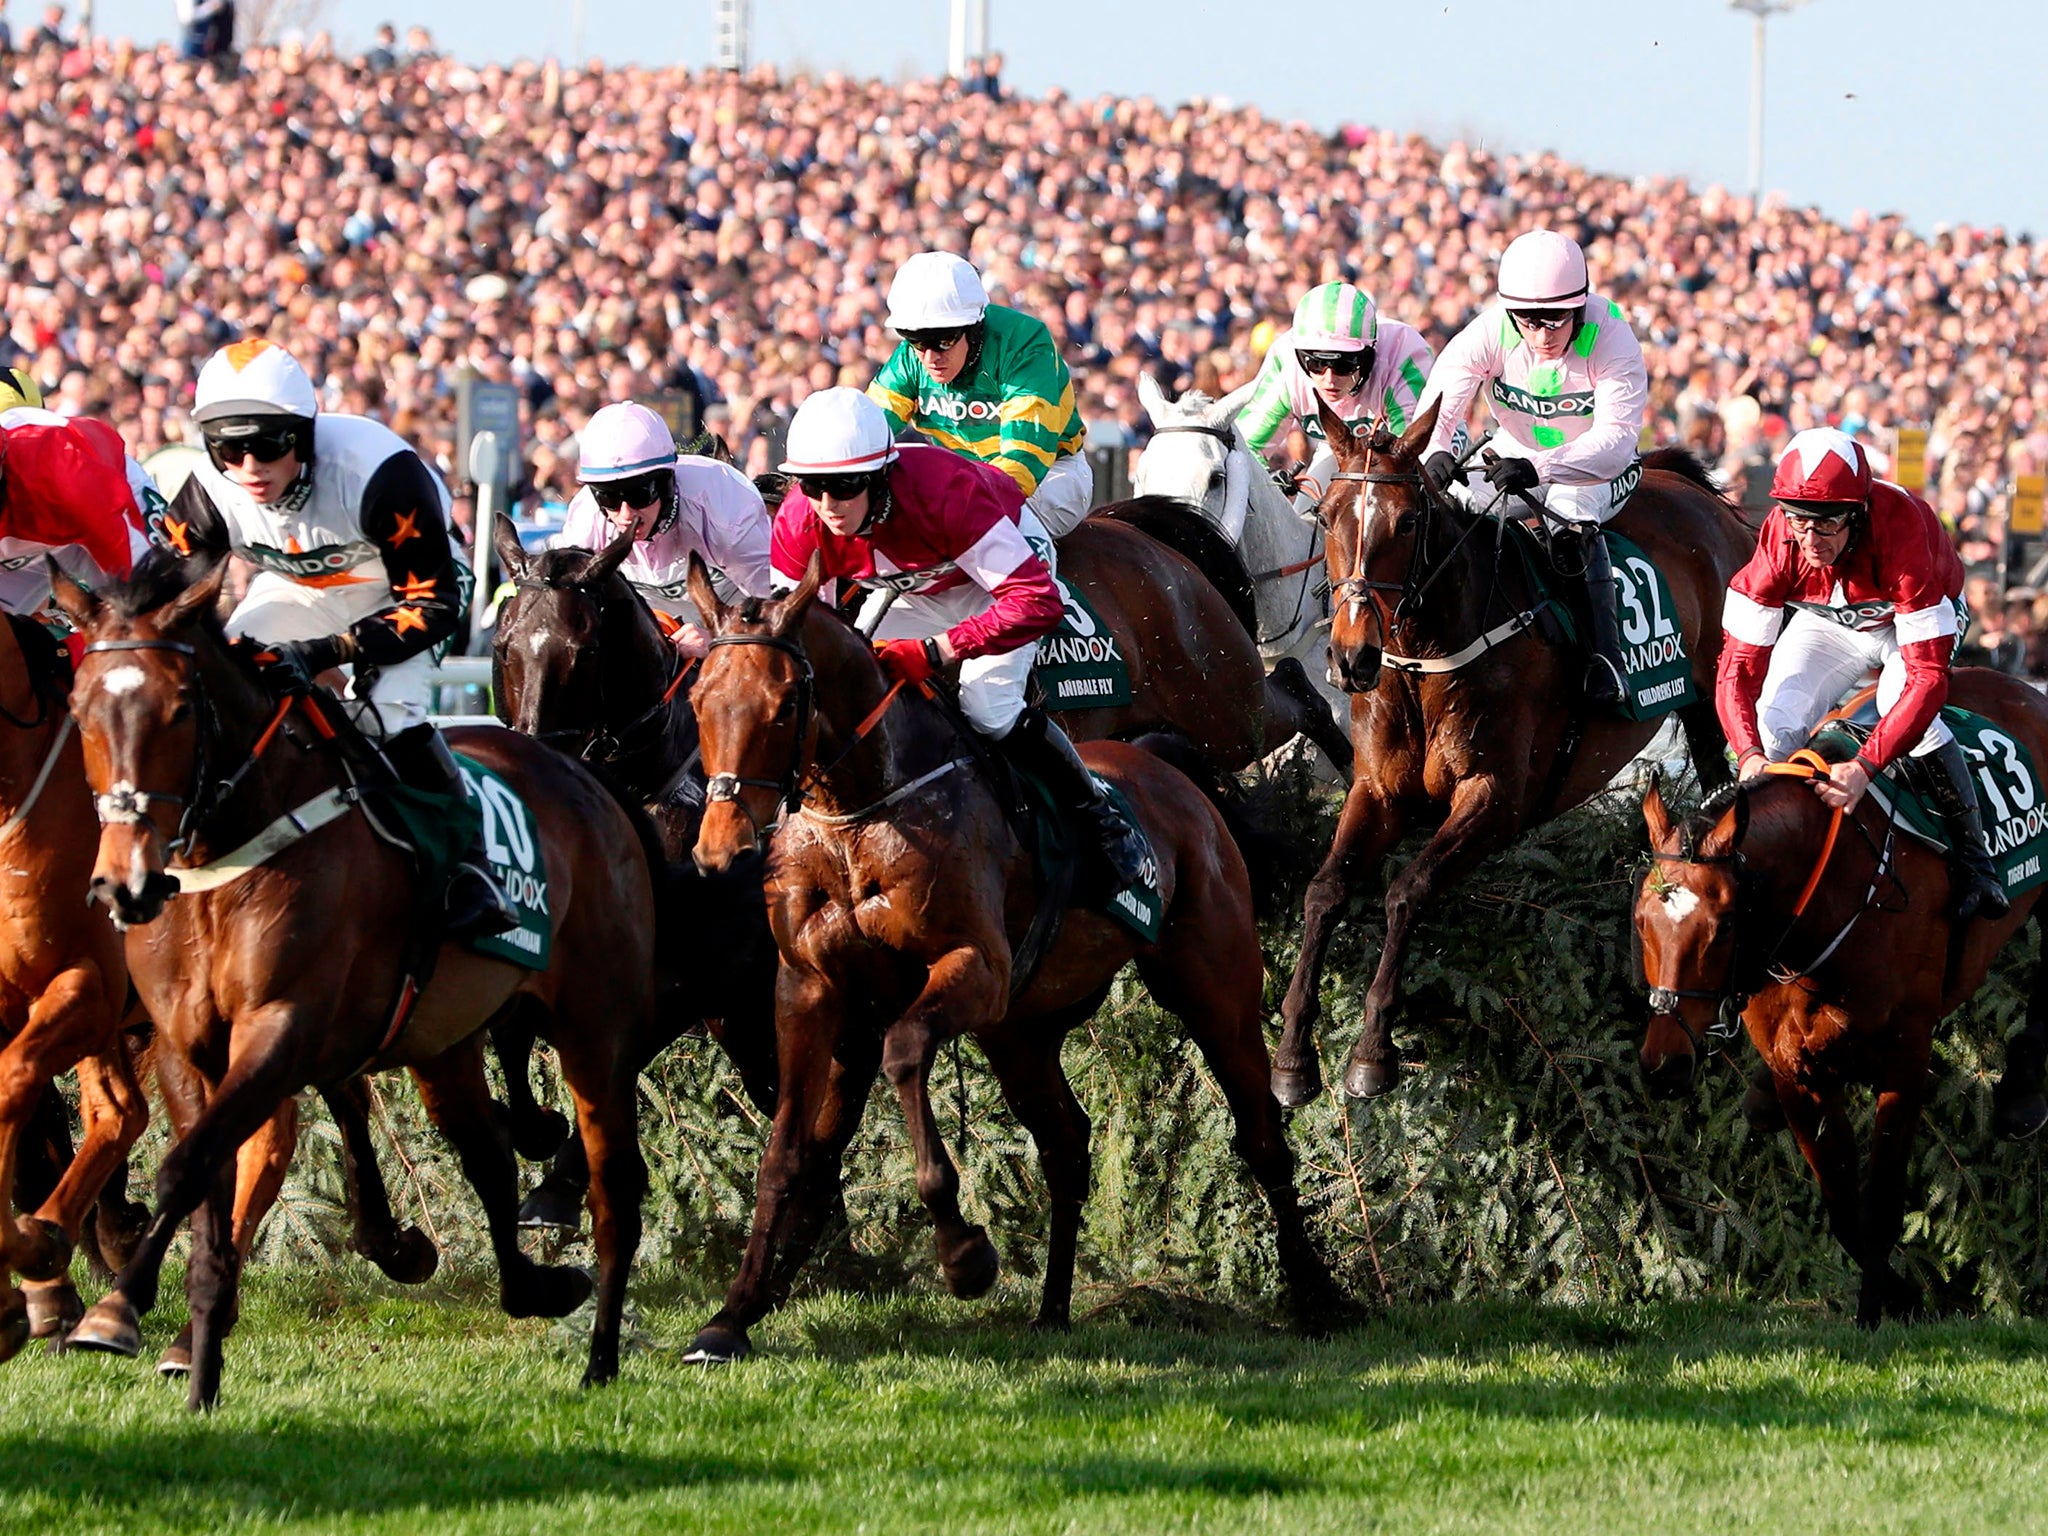 Tiger Roll emerged late to win the Grand National